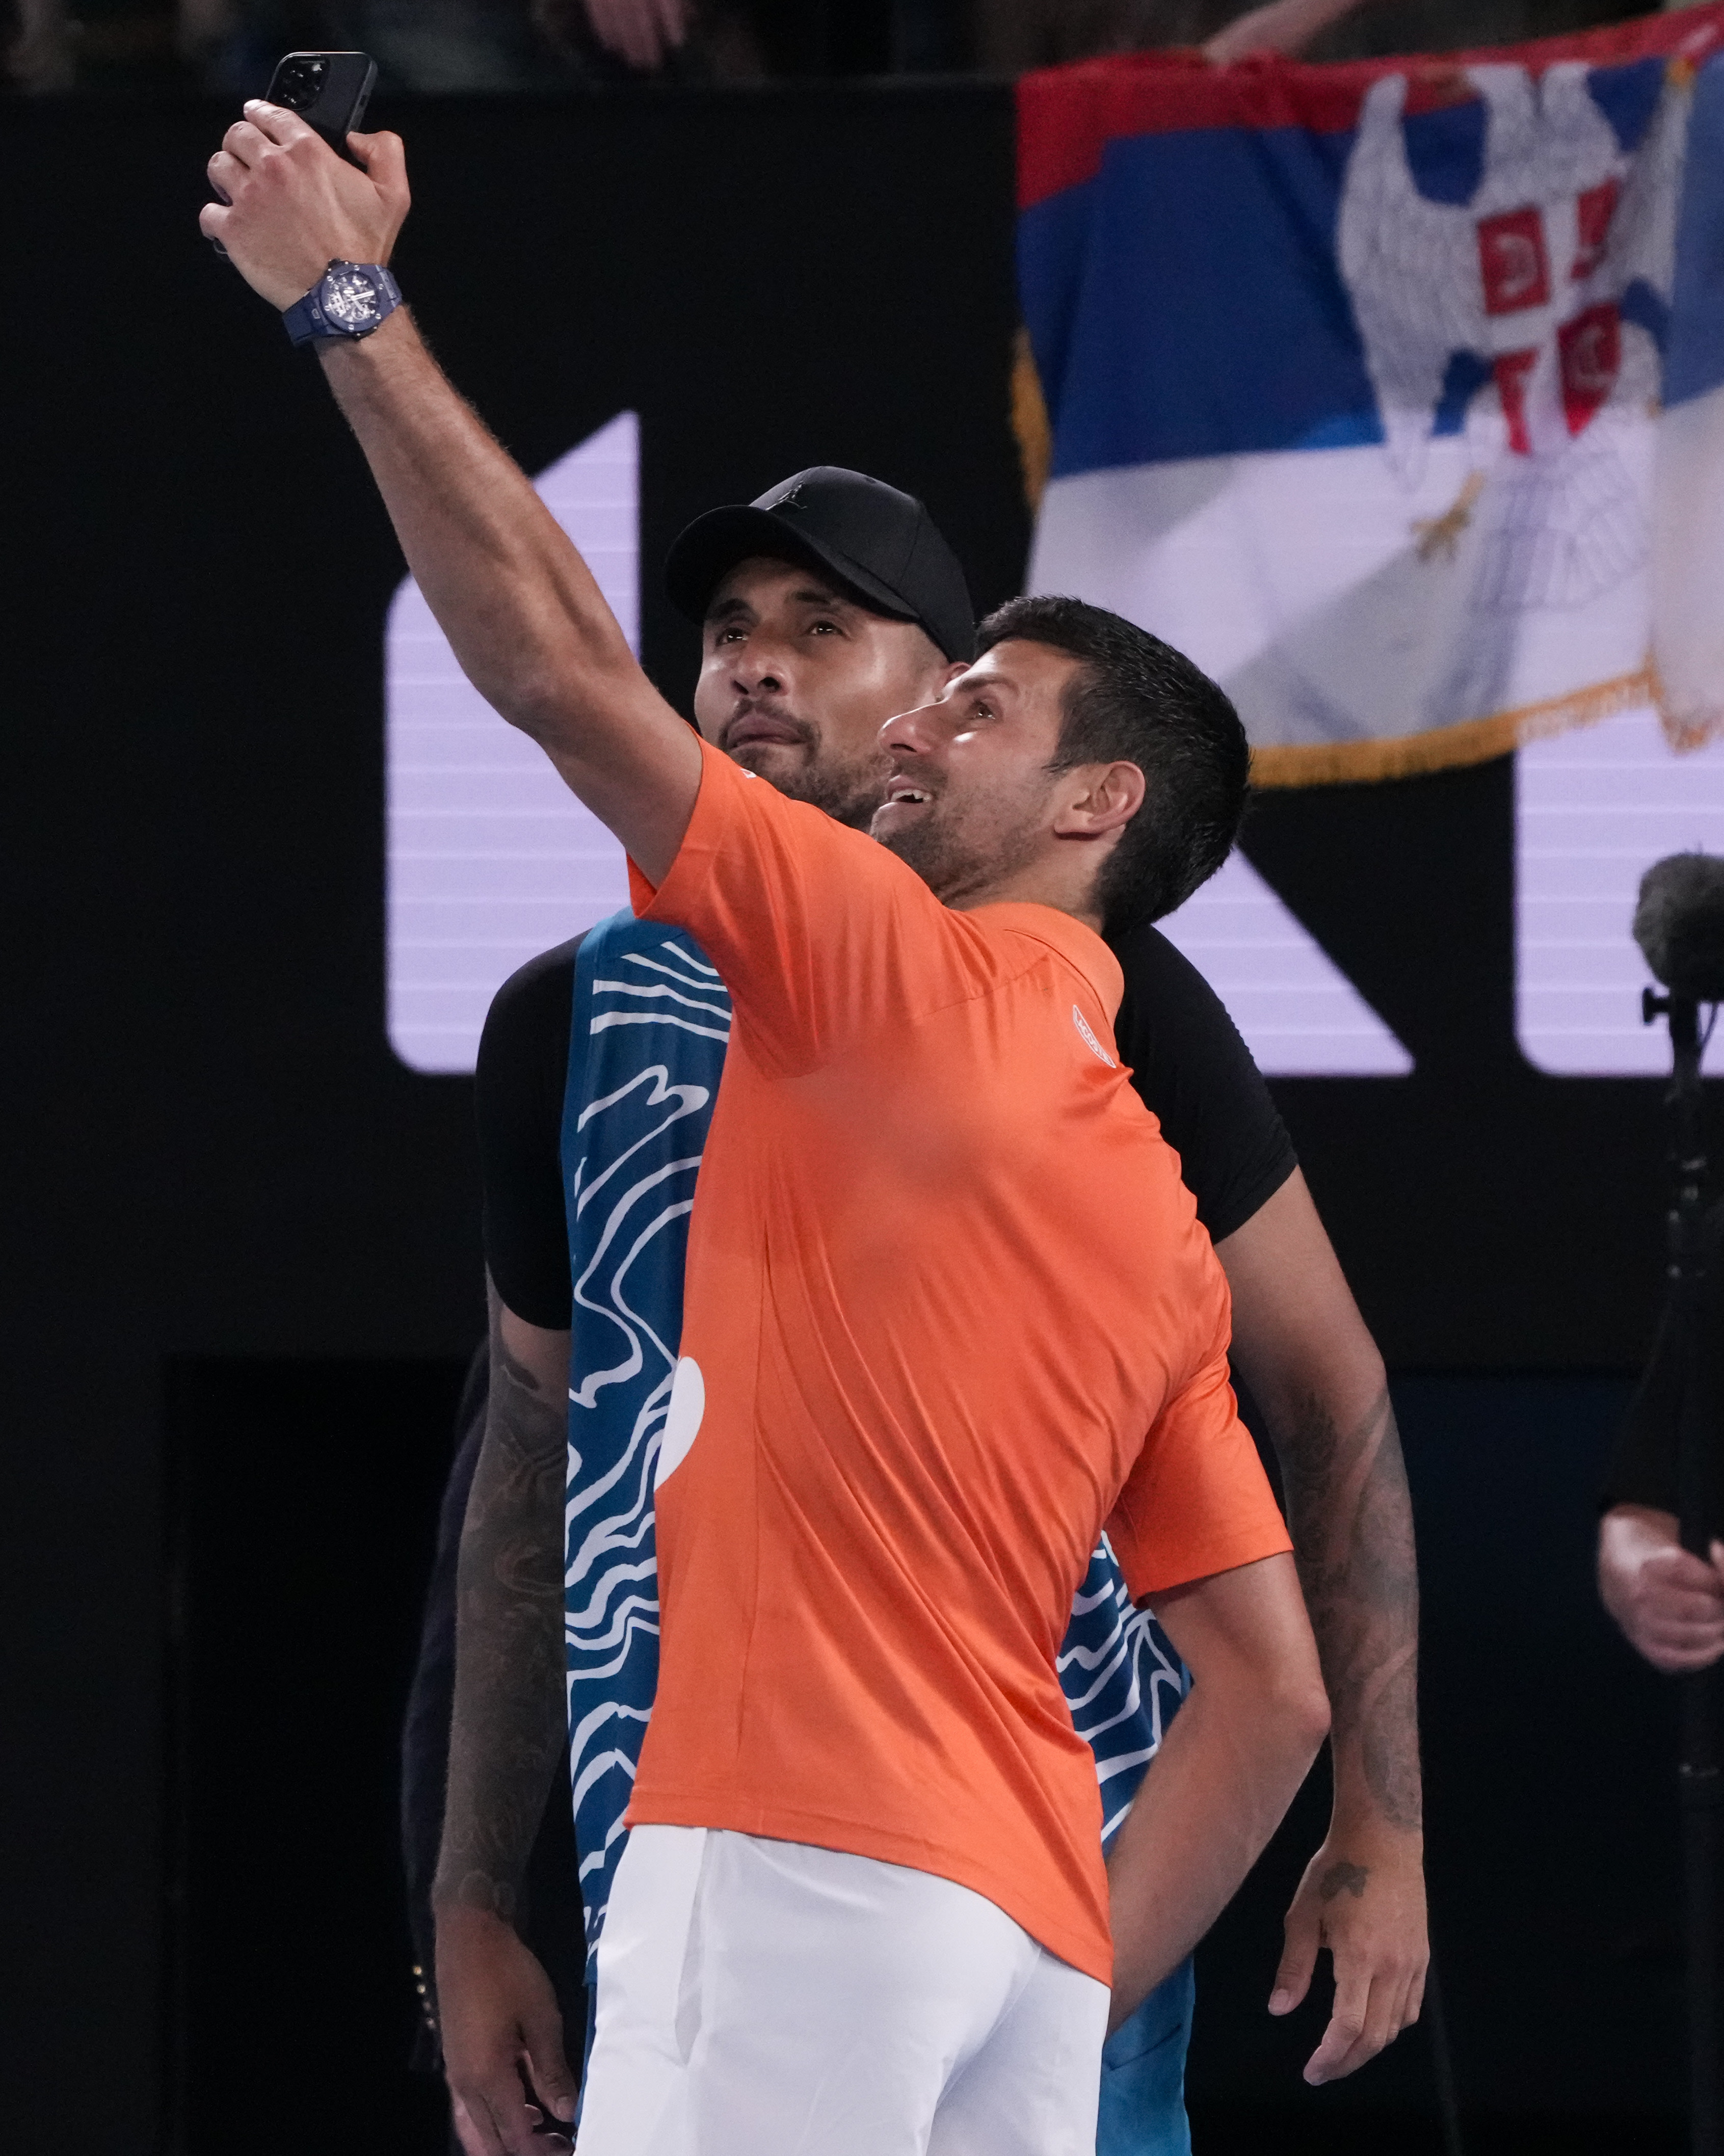 In exhibition with Kyrgios, Djokovic receives warm welcome in Melbourne return